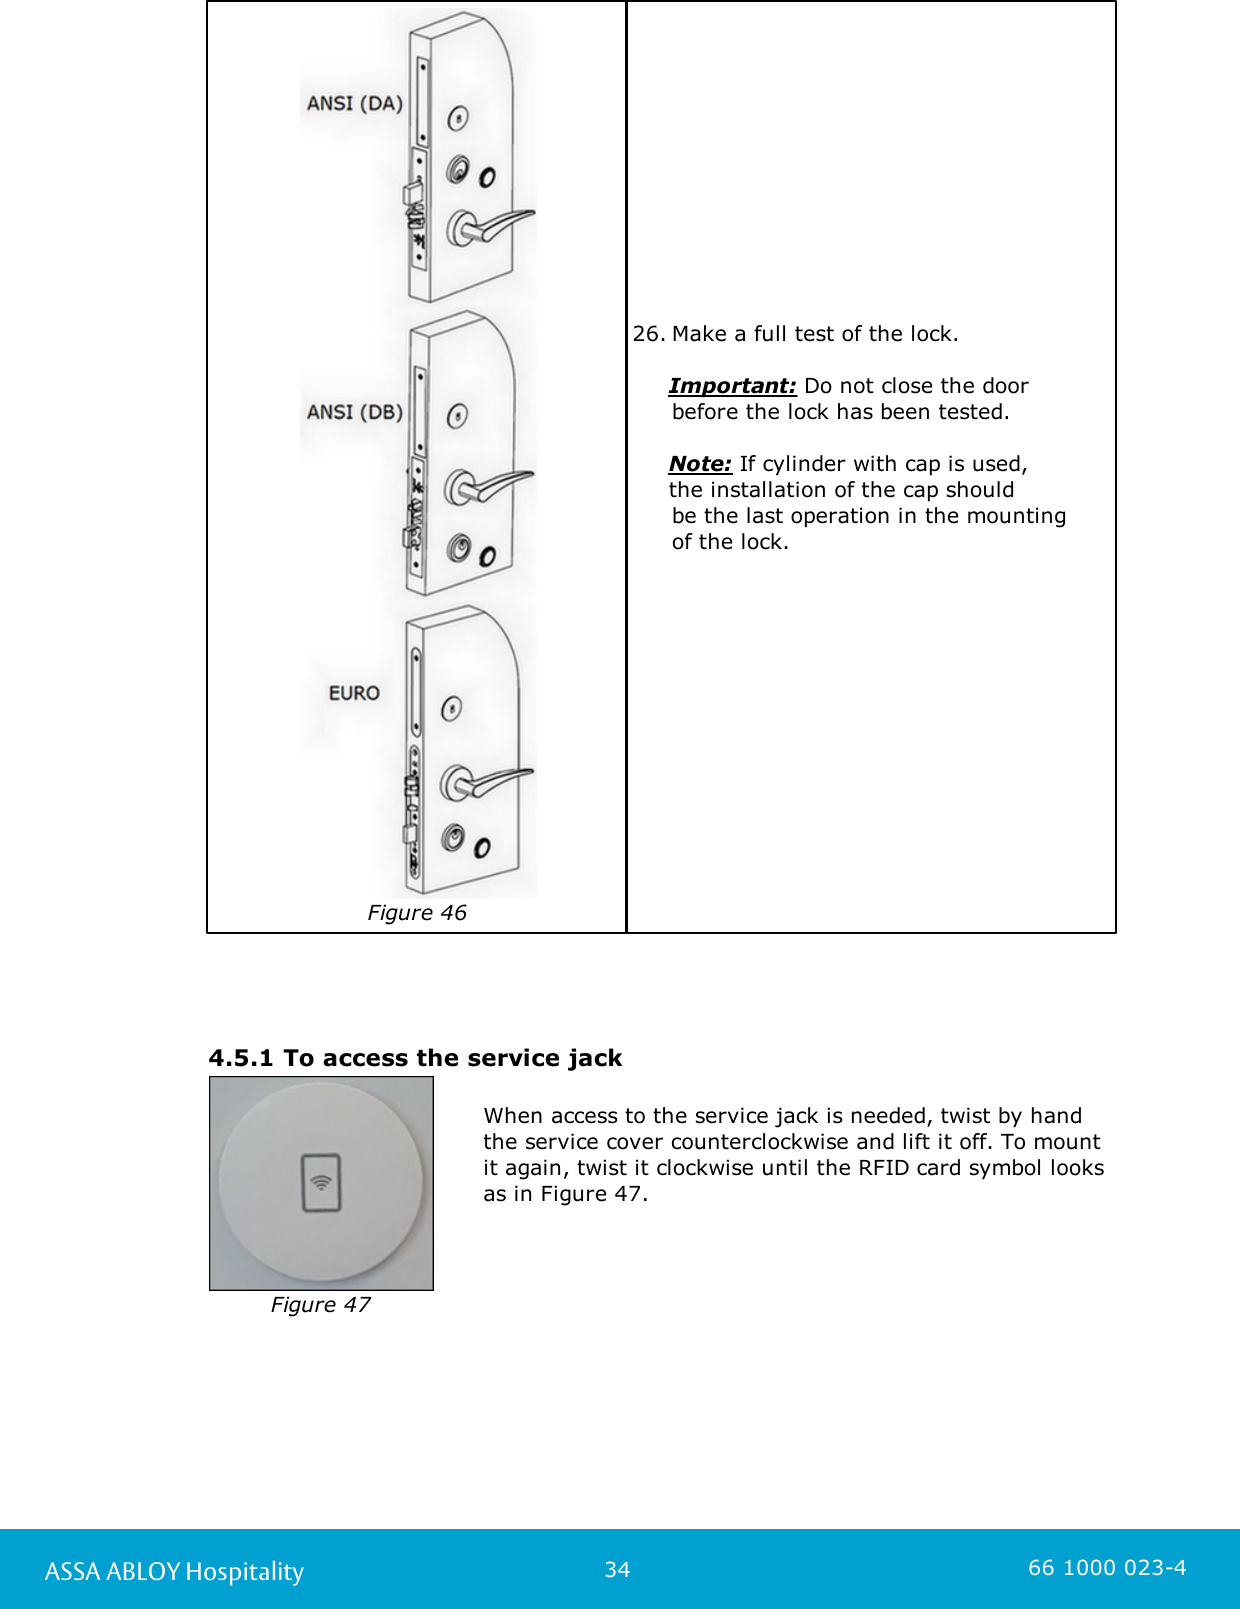 34ASSA ABLOY Hospitality 66 1000 023-4Figure 4626. Make a full test of the lock.      Important: Do not close the door before the lock has been tested.      Note: If cylinder with cap is used,      the installation of the cap should be the last operation in the mounting of the lock.  4.5.1 To access the service jackFigure 47When access to the service jack is needed, twist by handthe service cover counterclockwise and lift it off. To mountit again, twist it clockwise until the RFID card symbol looksas in Figure 47. 